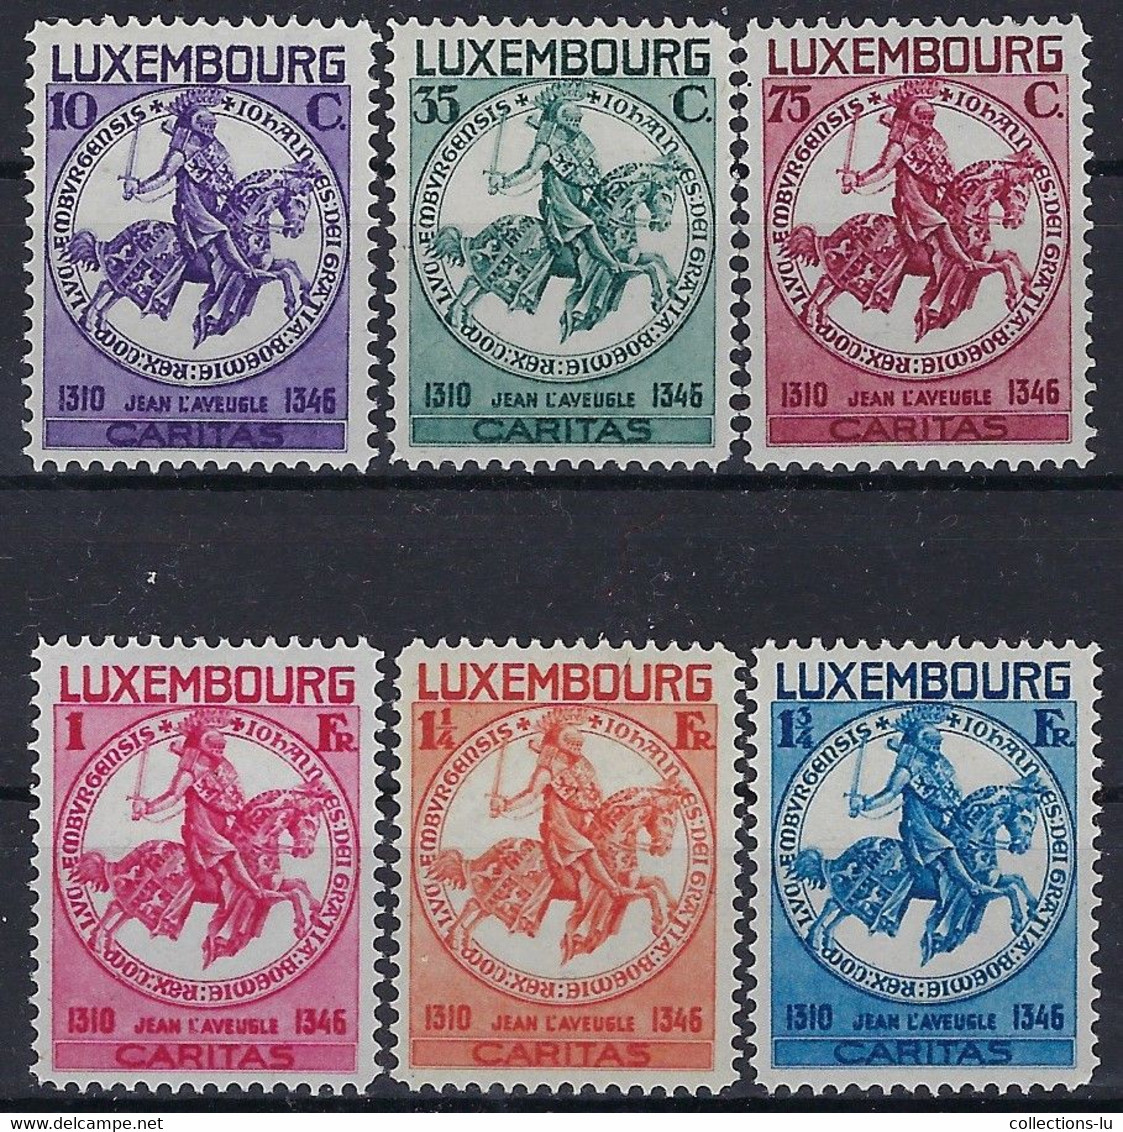 Luxembourg - Luxemburg - Timbres  1934  CARITAS   Jean L'Aveugle  Série MH*  VC.140,- - Usados